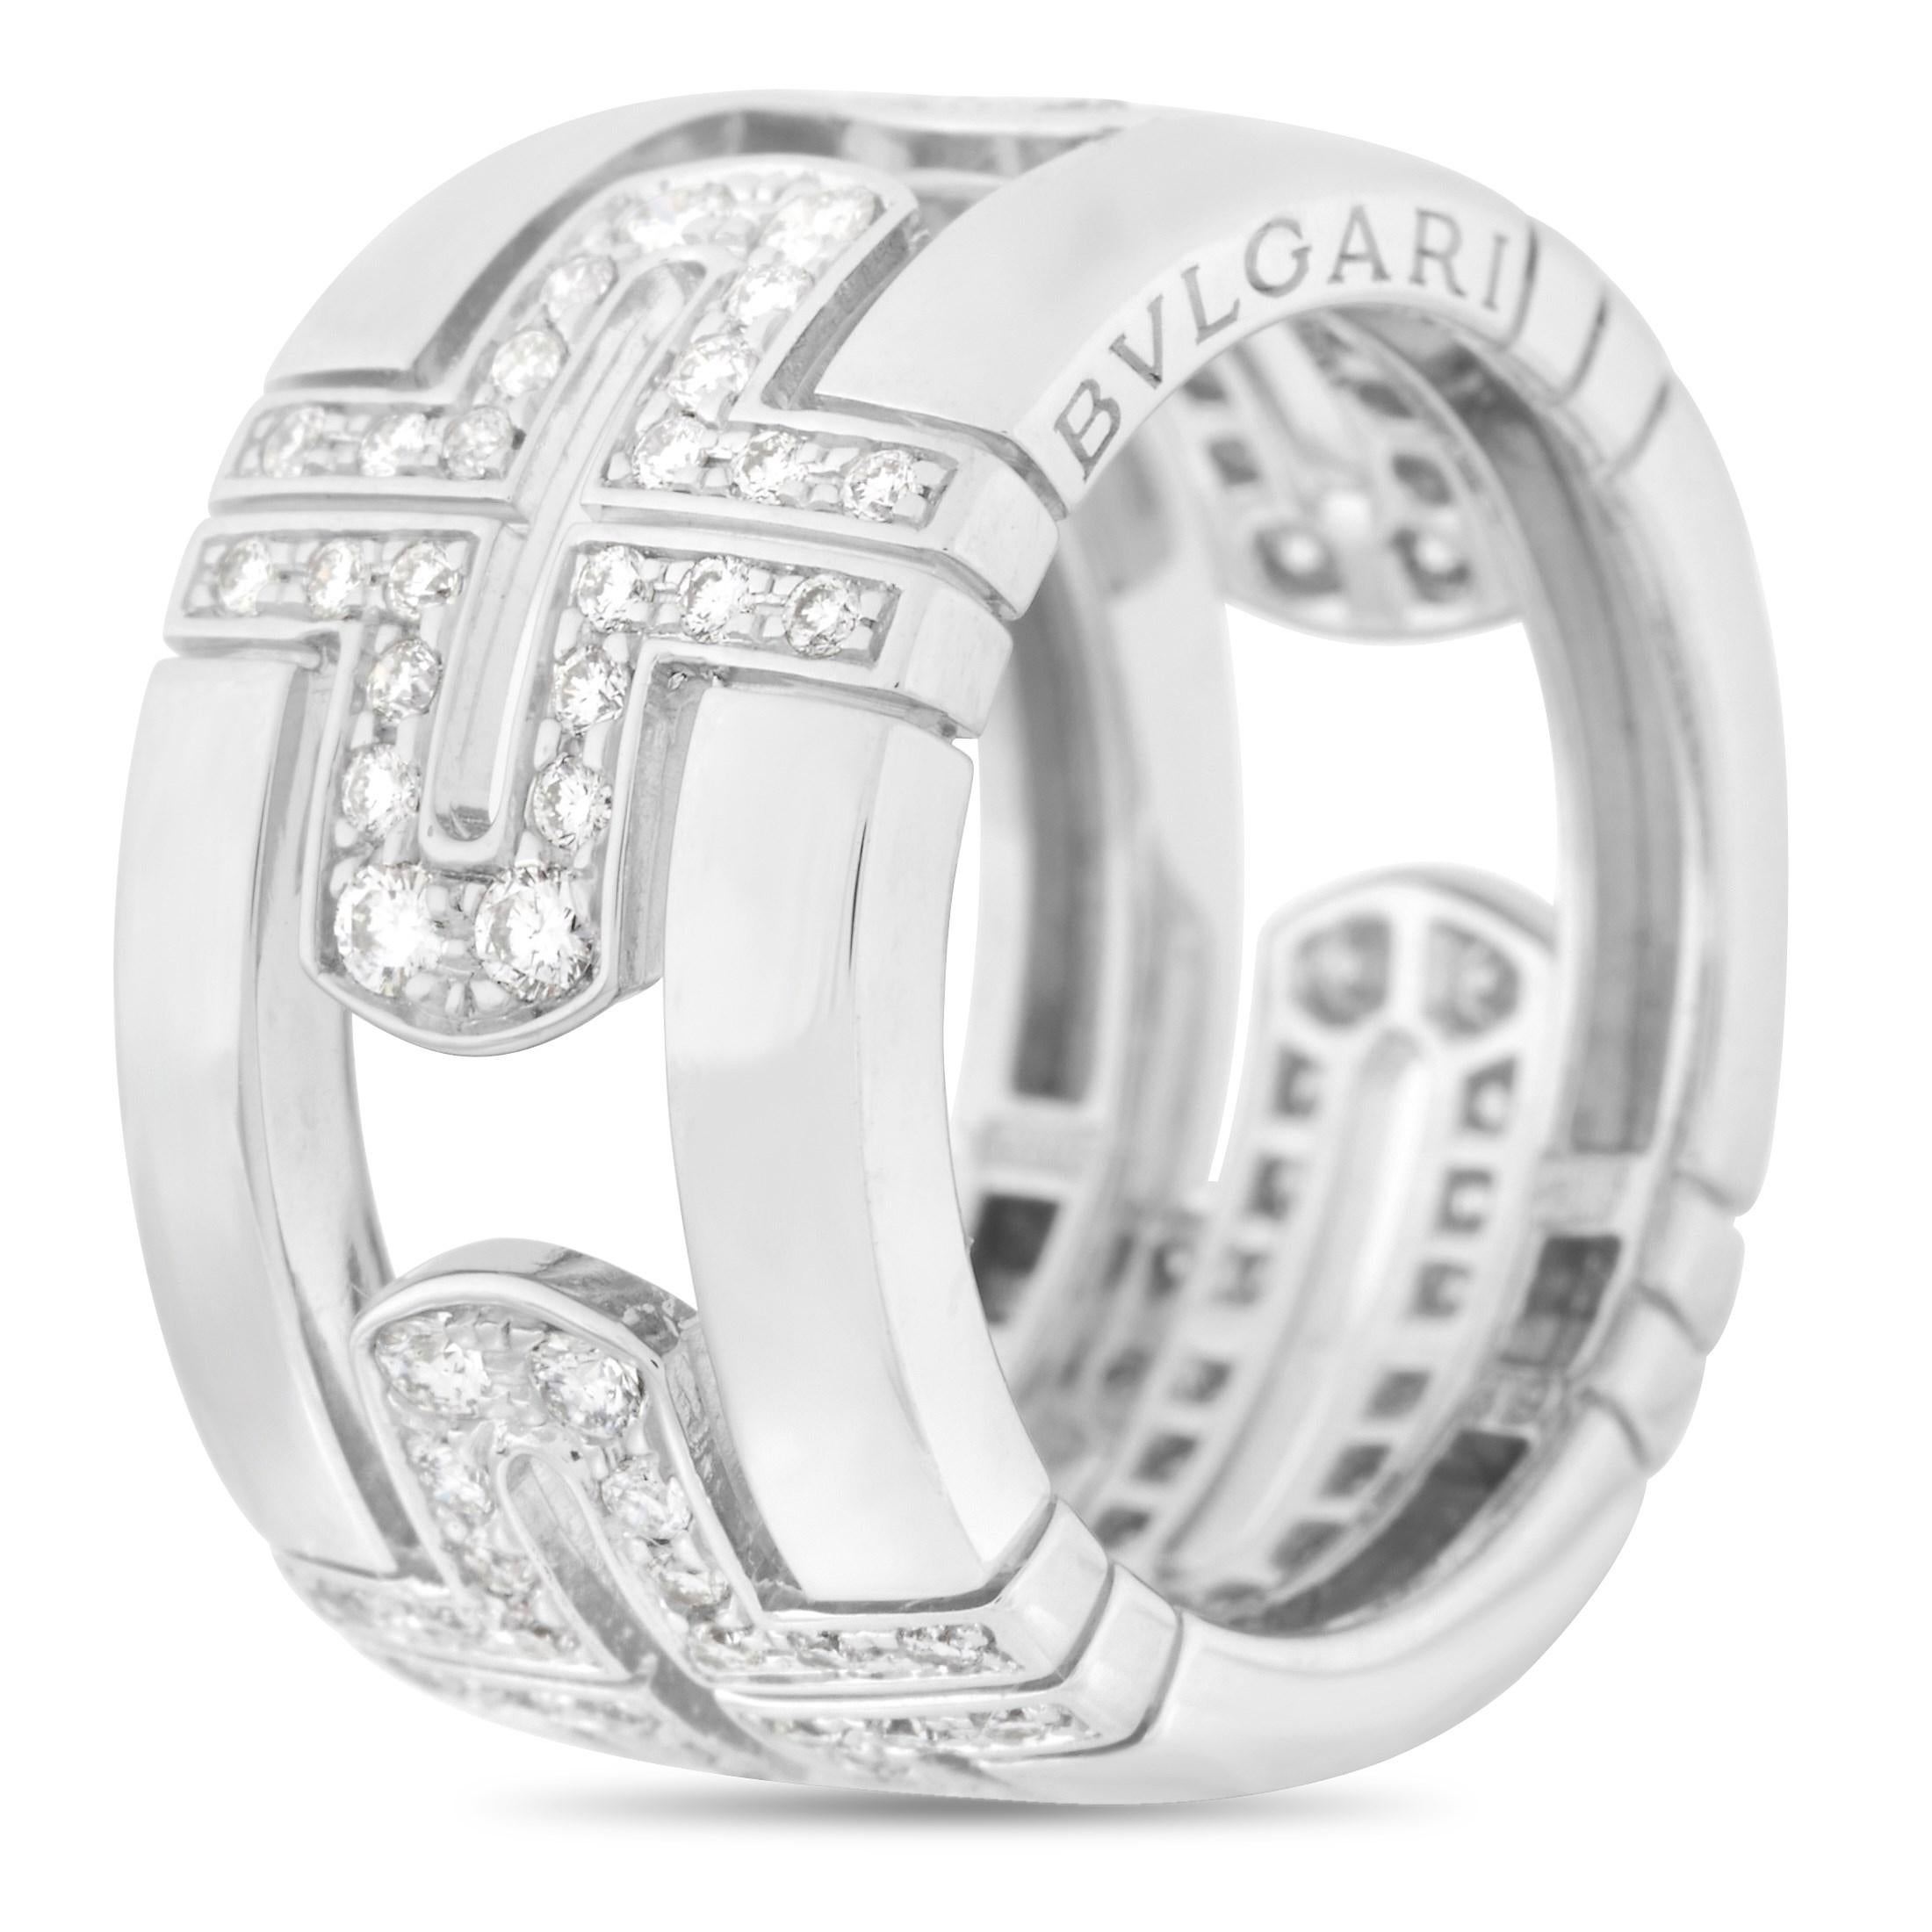 This Bvlgari Parentesi 18K White Gold 0.70 ct Diamond Cross Ring is made with 18K White Gold. The band measures 11 mm and features an open cross design around it, set with 0.70 carats of round cut diamonds with F color and VVS clarity. The band is